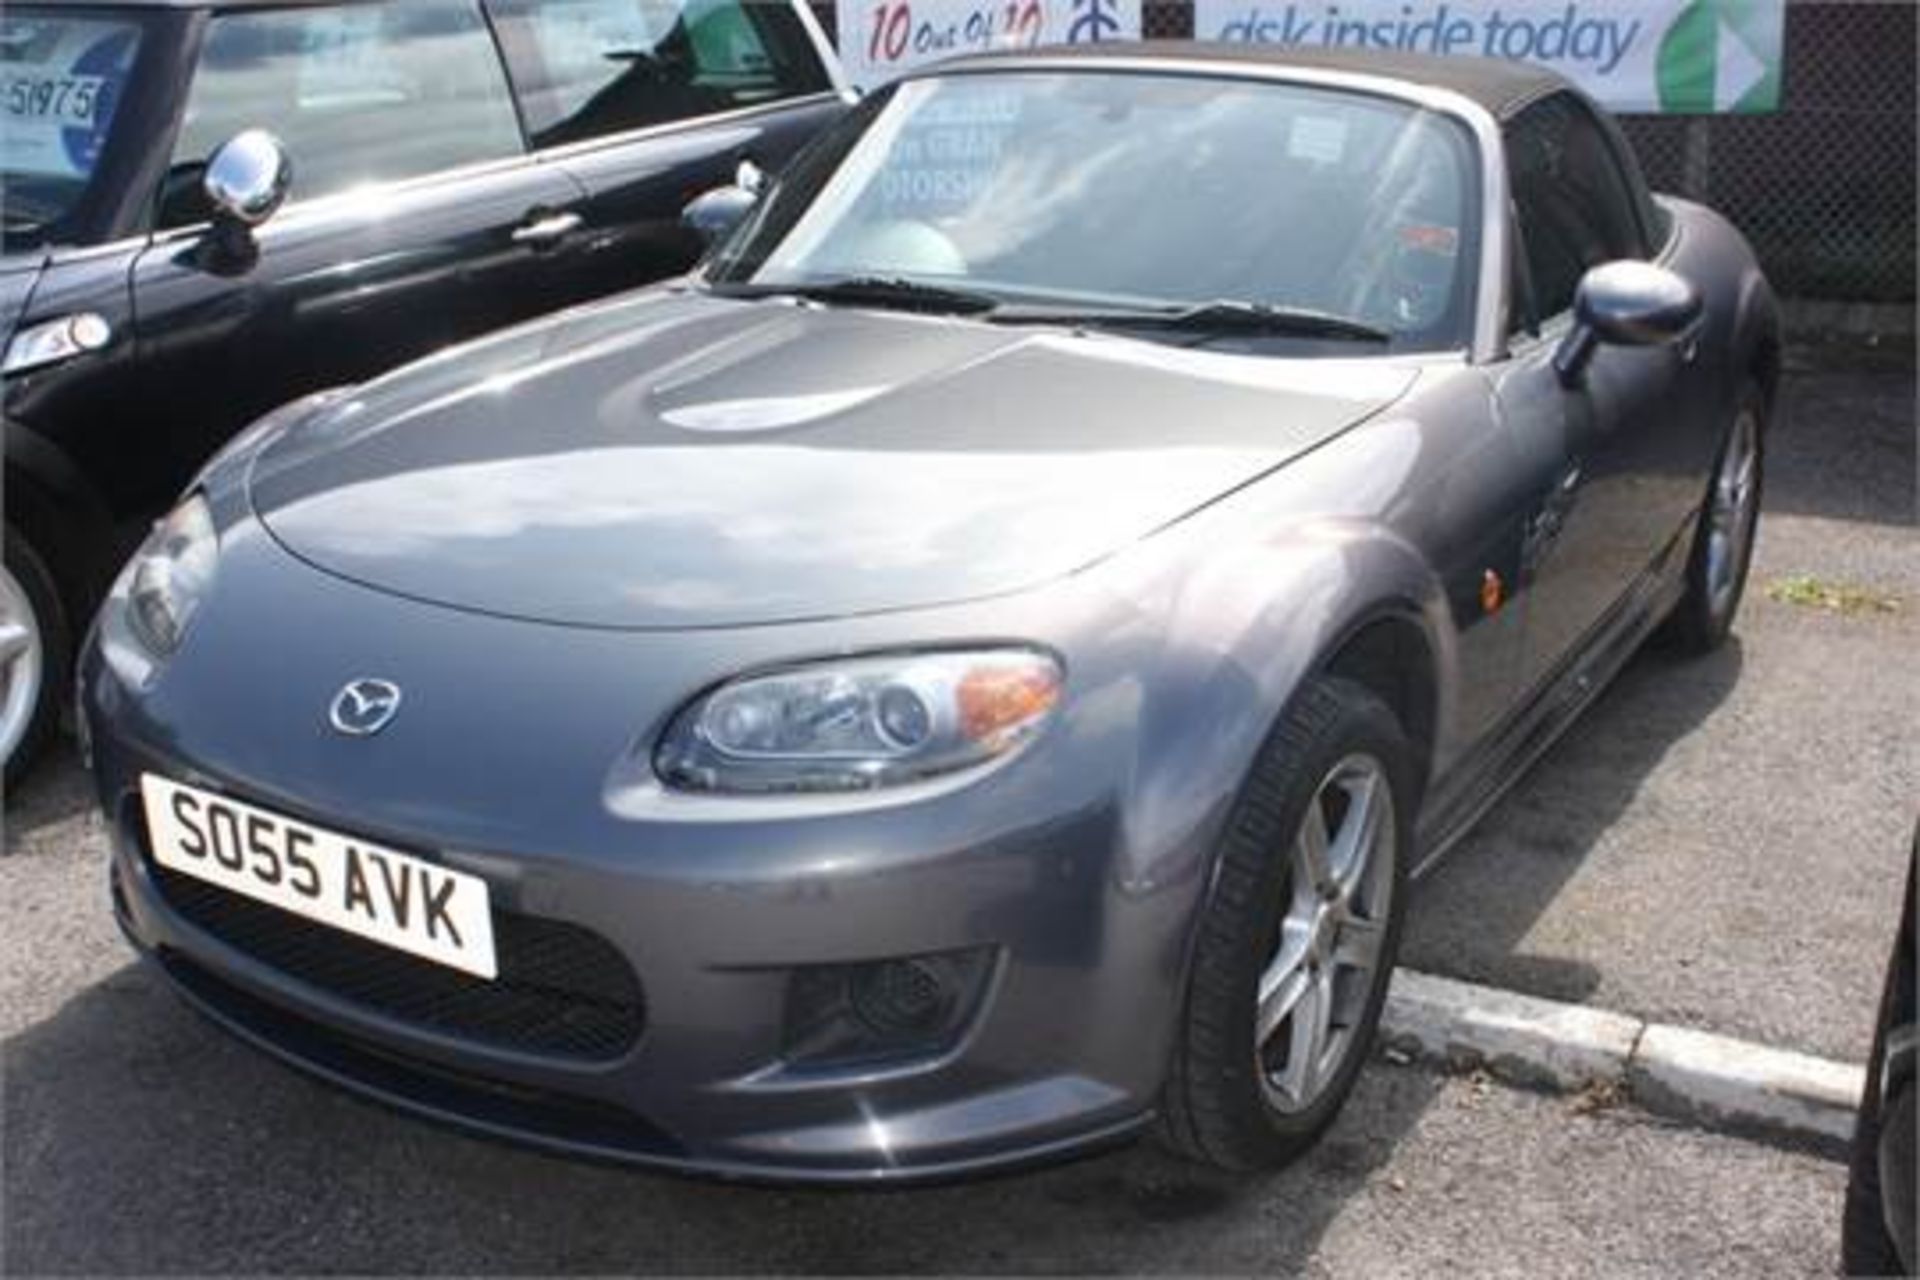 MAZDA MX5 CONVERTIBLE, DATE OF FIRST 25/11/2005, SO55 AVK, 1.8 LTR, PETROL, MANUAL 5 SPEED, 2 - Image 2 of 8